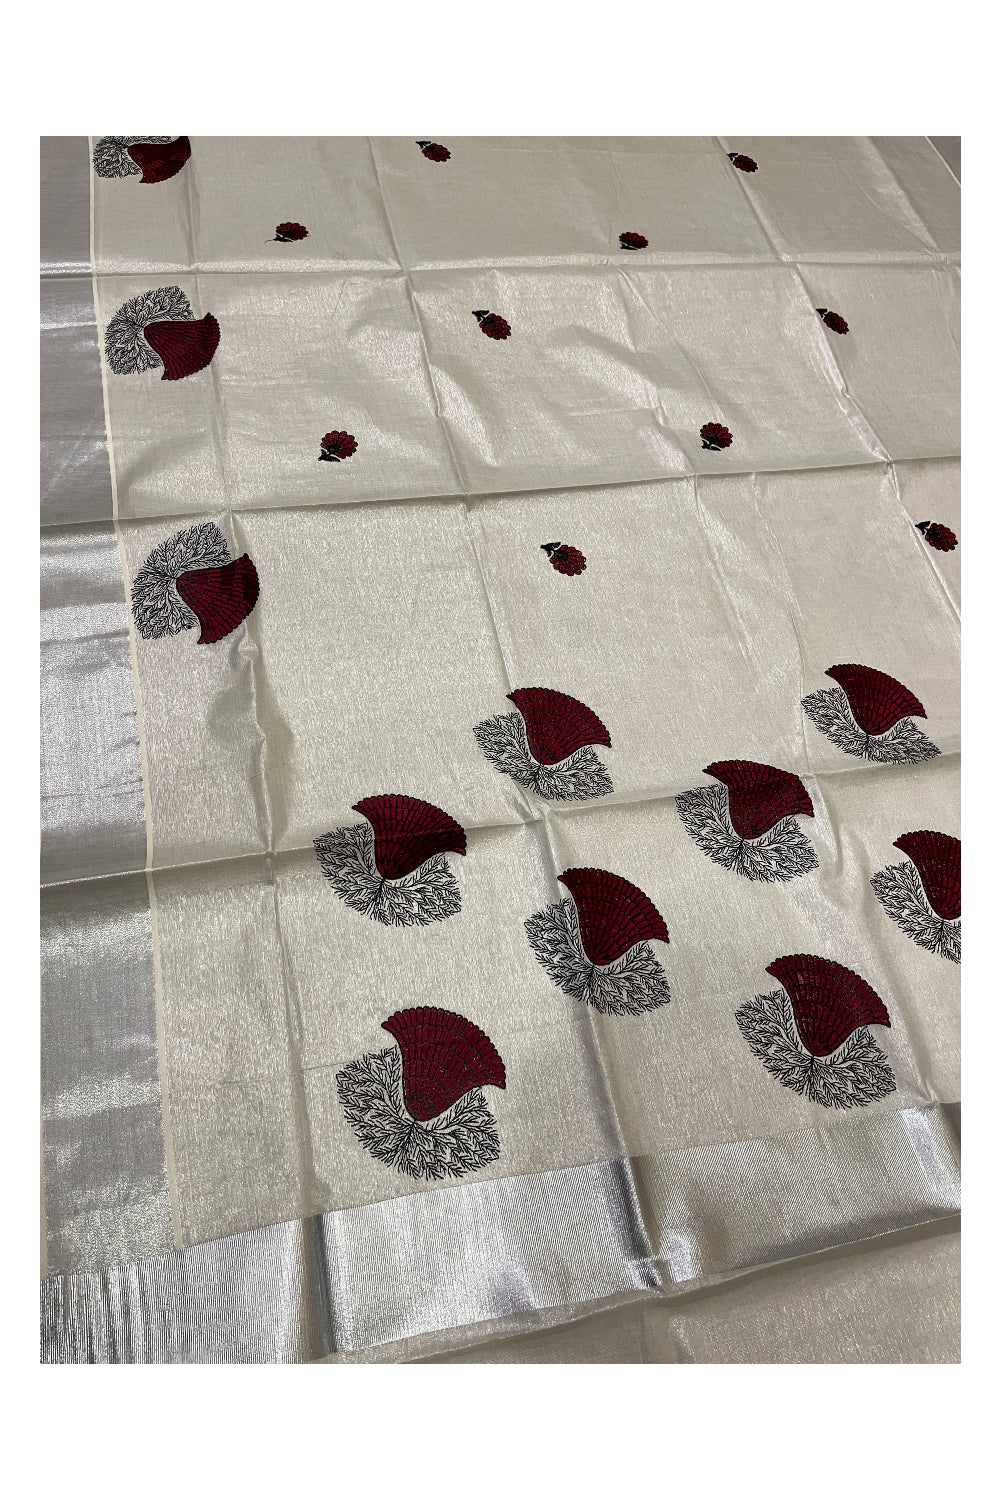 Kerala Silver Tissue Kasavu Saree with Maroon Floral Embroidery Design